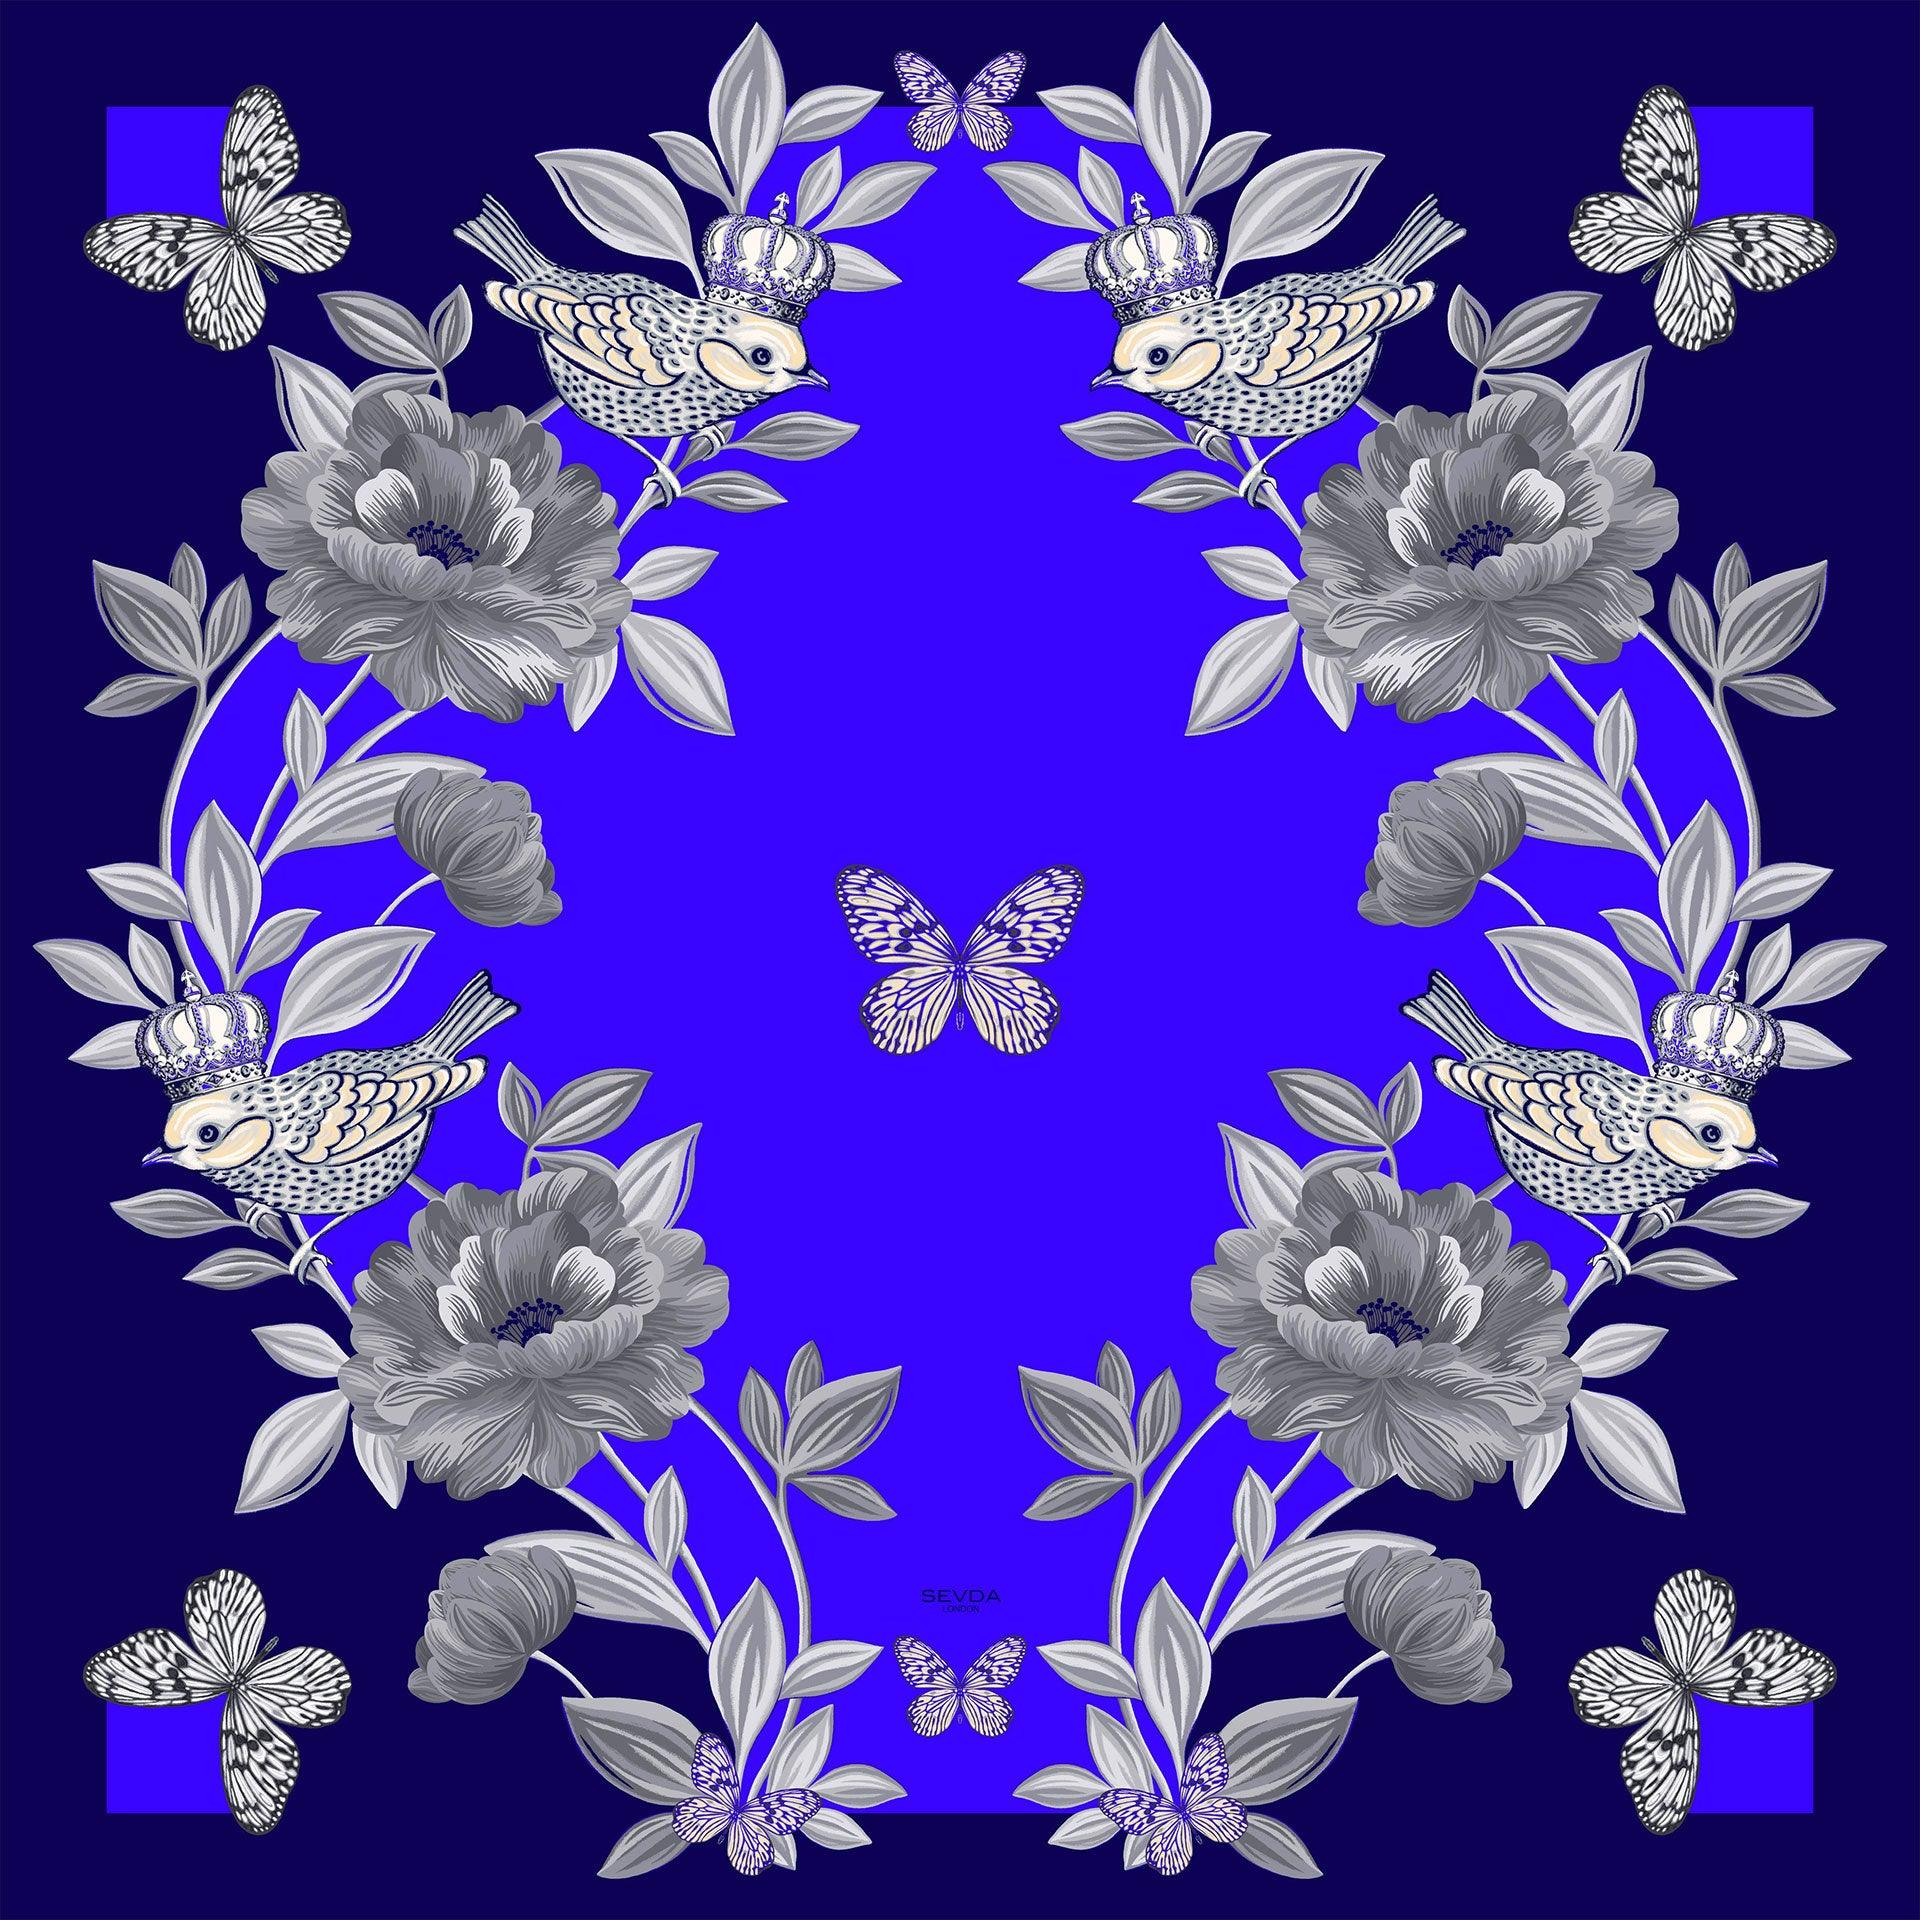 Cobalt Blue British Rose Garden Silk Scarf - Marrying London's design with Italian craftsmanship, a luxurious gift from the heart.